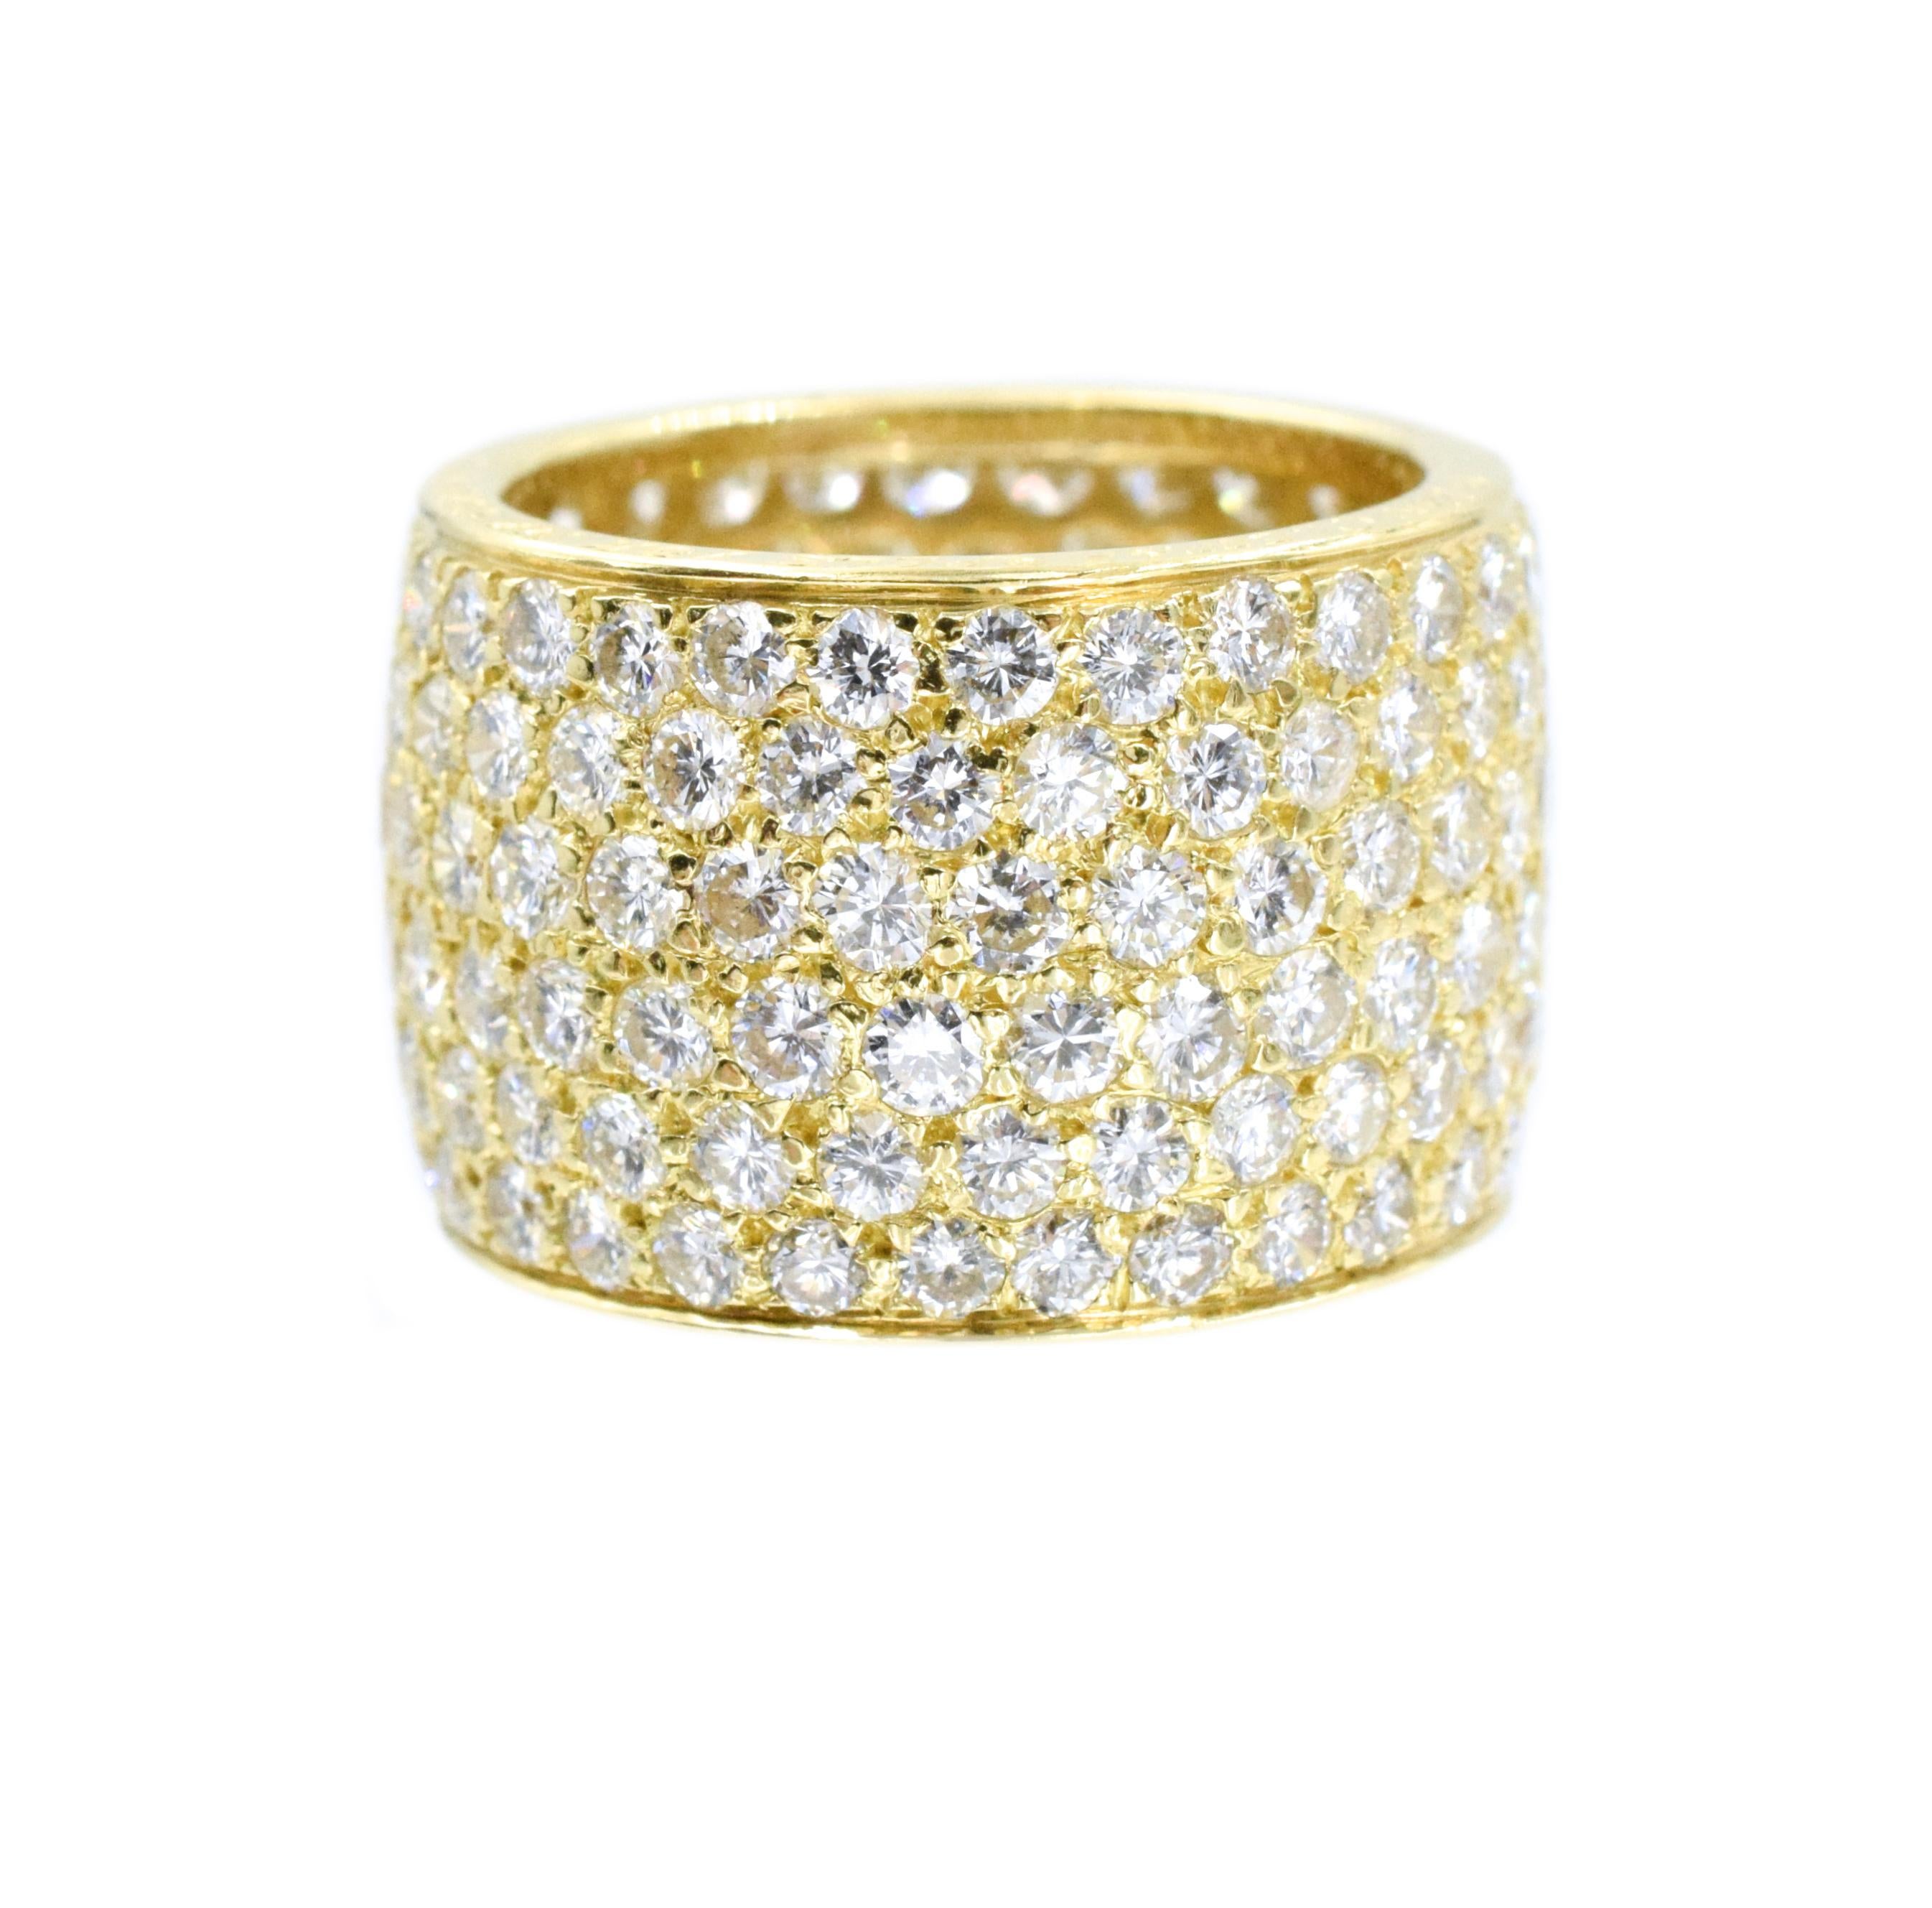 Van Cleef and Arpels  Wide Pave Diamond Band
Containing 180 Pave Set Round Brilliant Cut Diamonds 
Set In 18 Karat Golden
Total diamond Weight is 7.75 Carats 
Hand Inscribed: Van Cleef and Arpels  NY XXXXXX.
Size 6.5
Width is:  13.5mm or 0.57 1.4cm